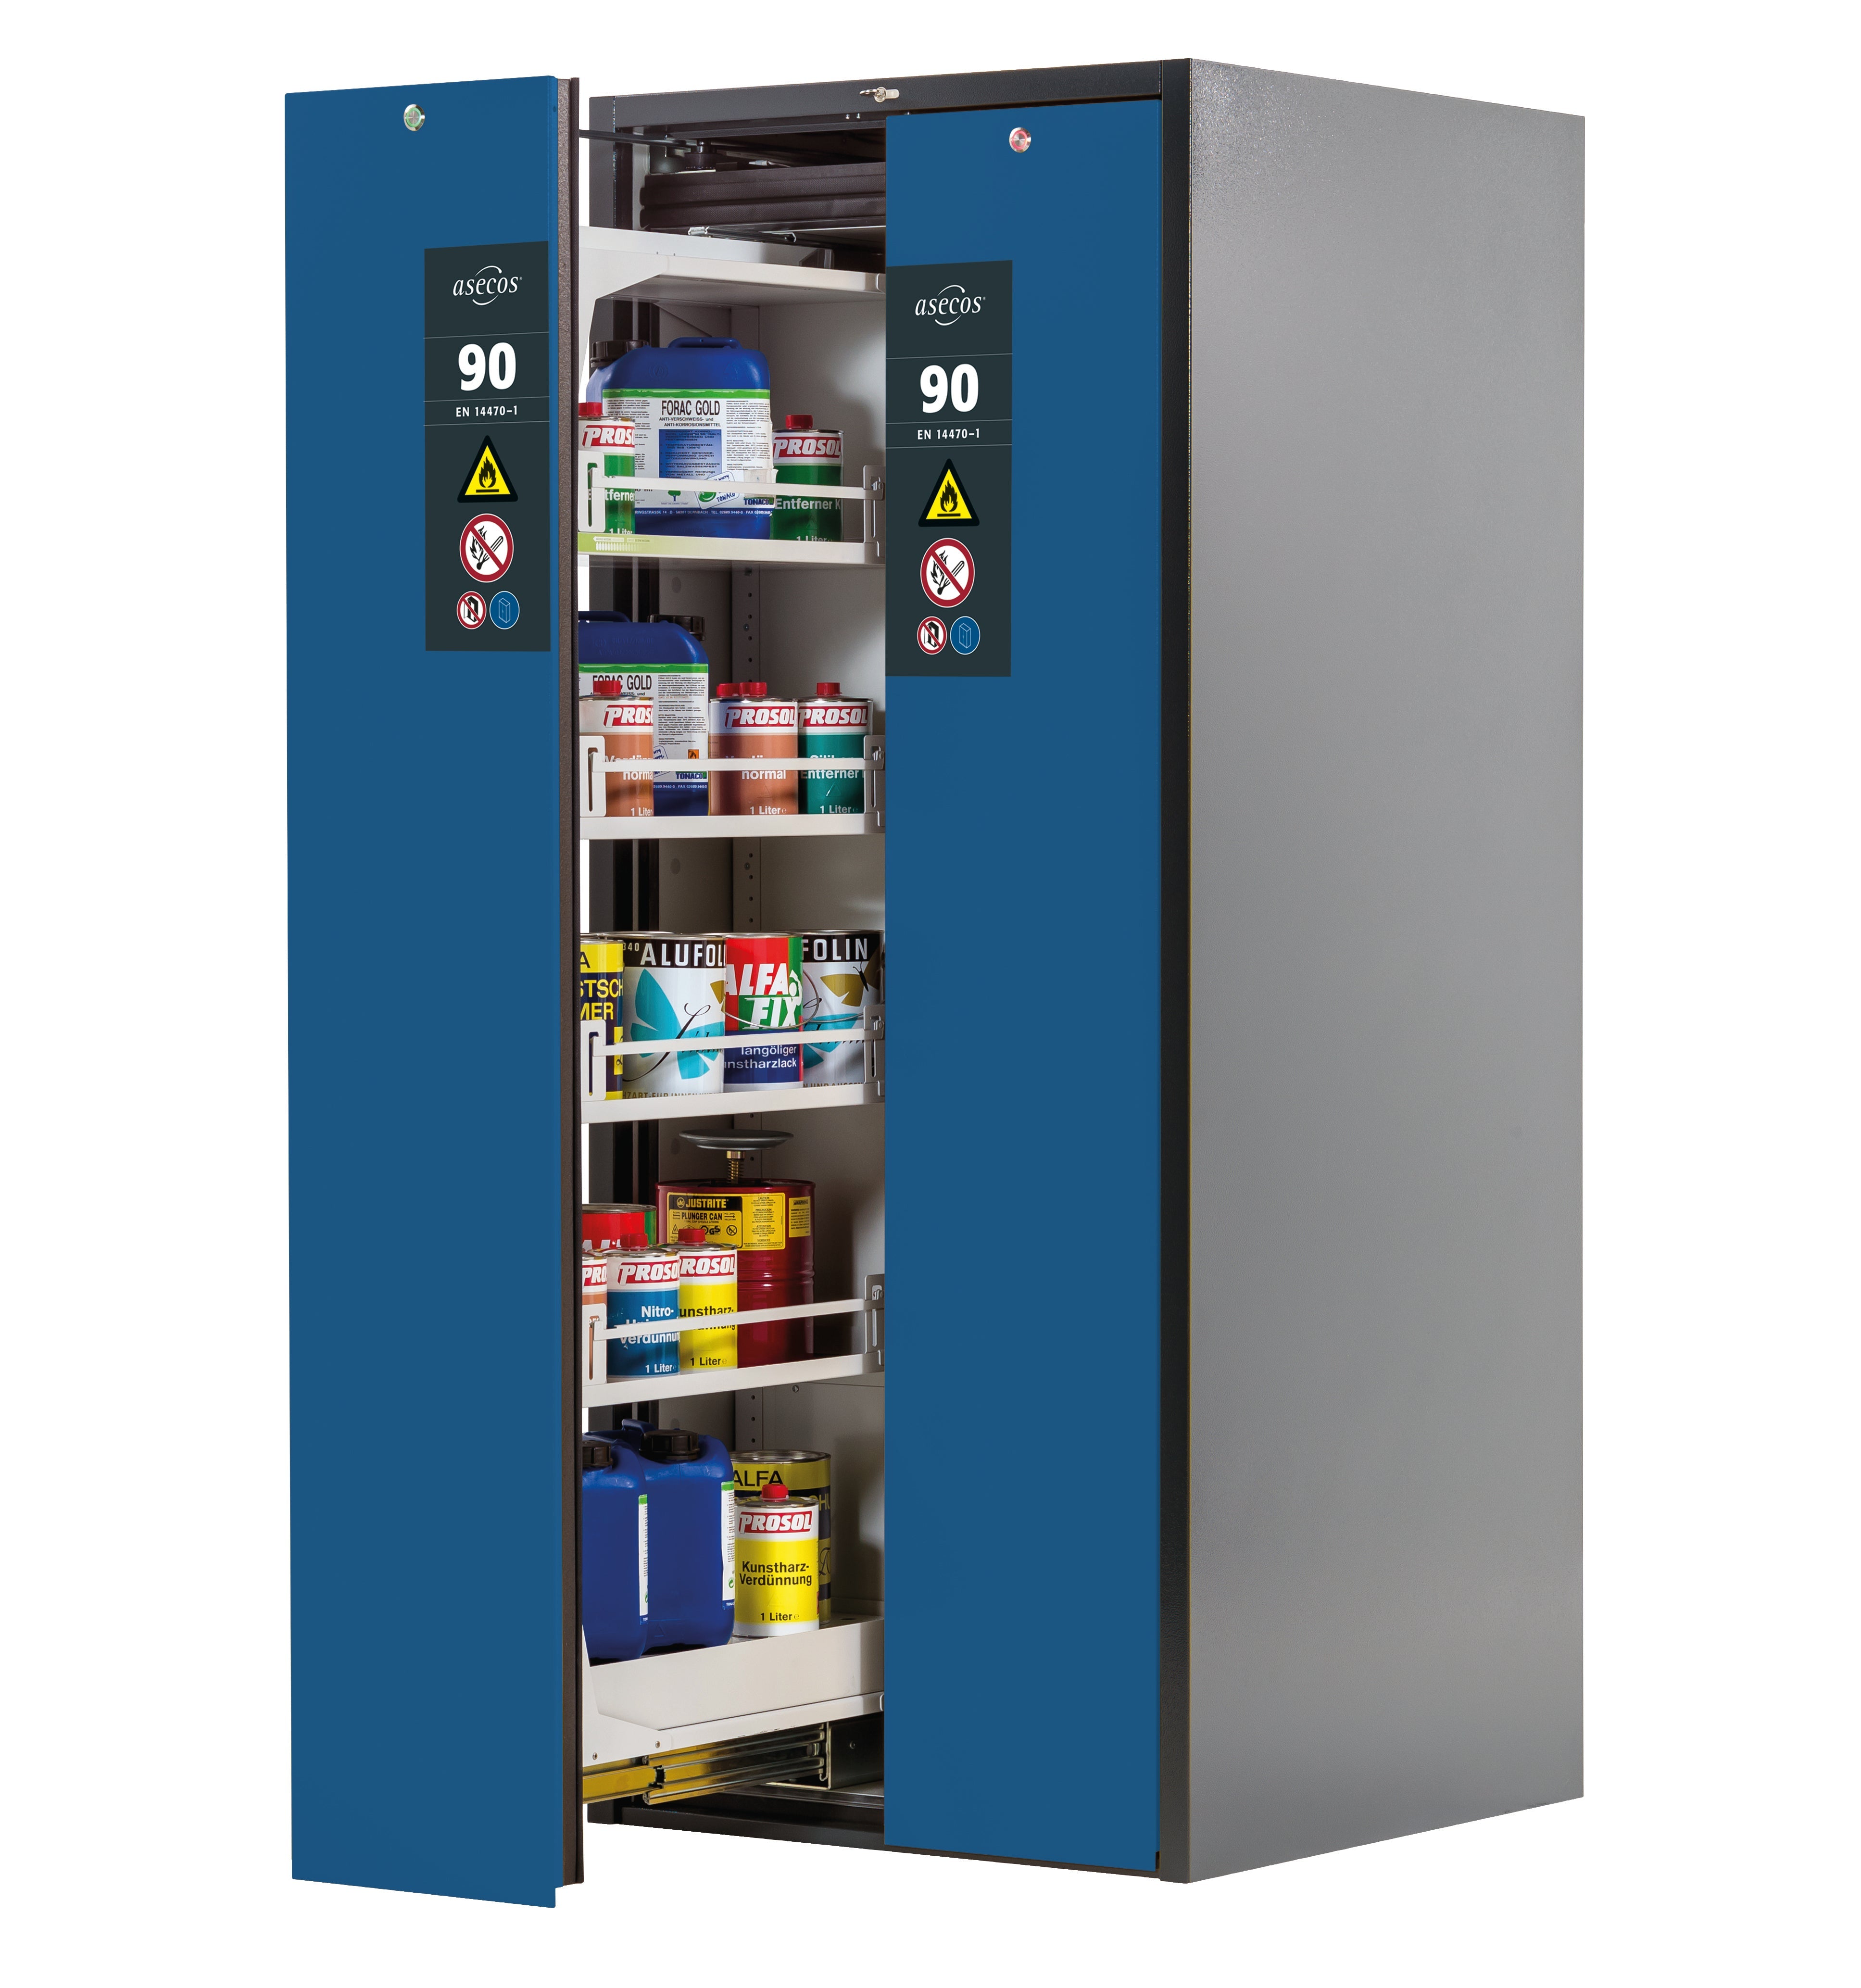 Type 90 safety cabinet V-MOVE-90 model V90.196.081.VDAC:0013 in gentian blue RAL 5010 with 4x standard shelves (sheet steel)